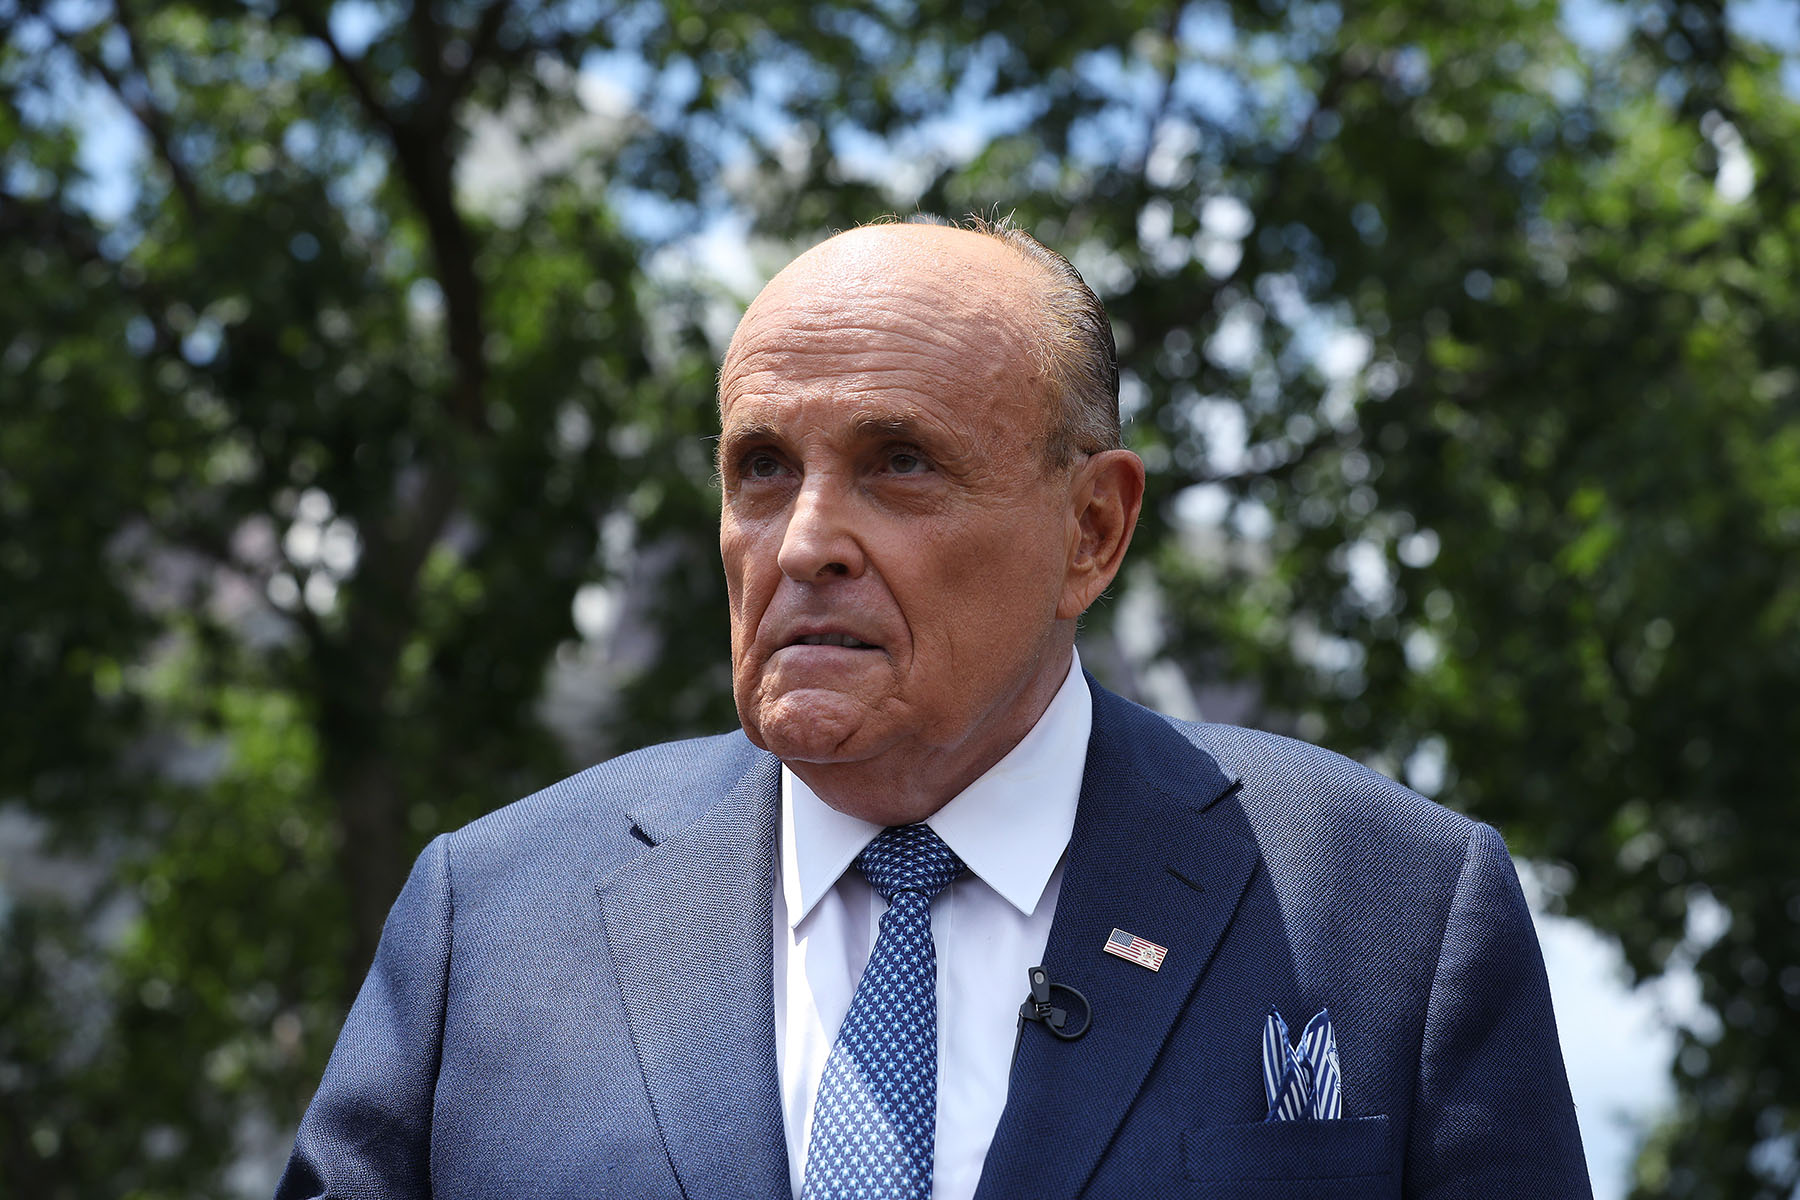 Rudy Giuliani talks to journalists outside the White House West Wing.